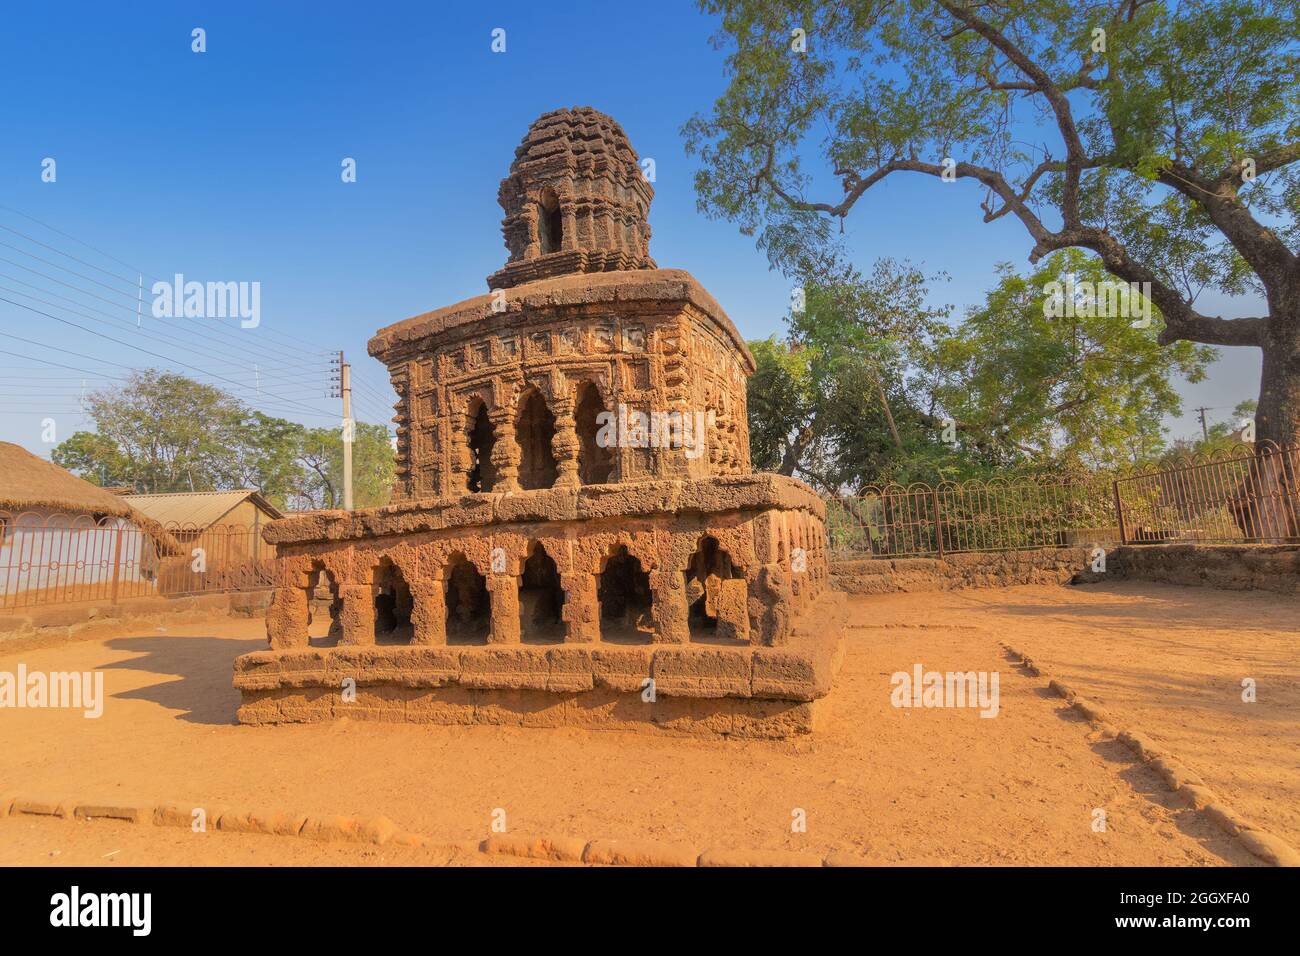 Stone chariot of Bishnupur, West Bengal , India. A famous small double storied structure built on laterite plinth - represents typical Bishnupur style Stock Photo